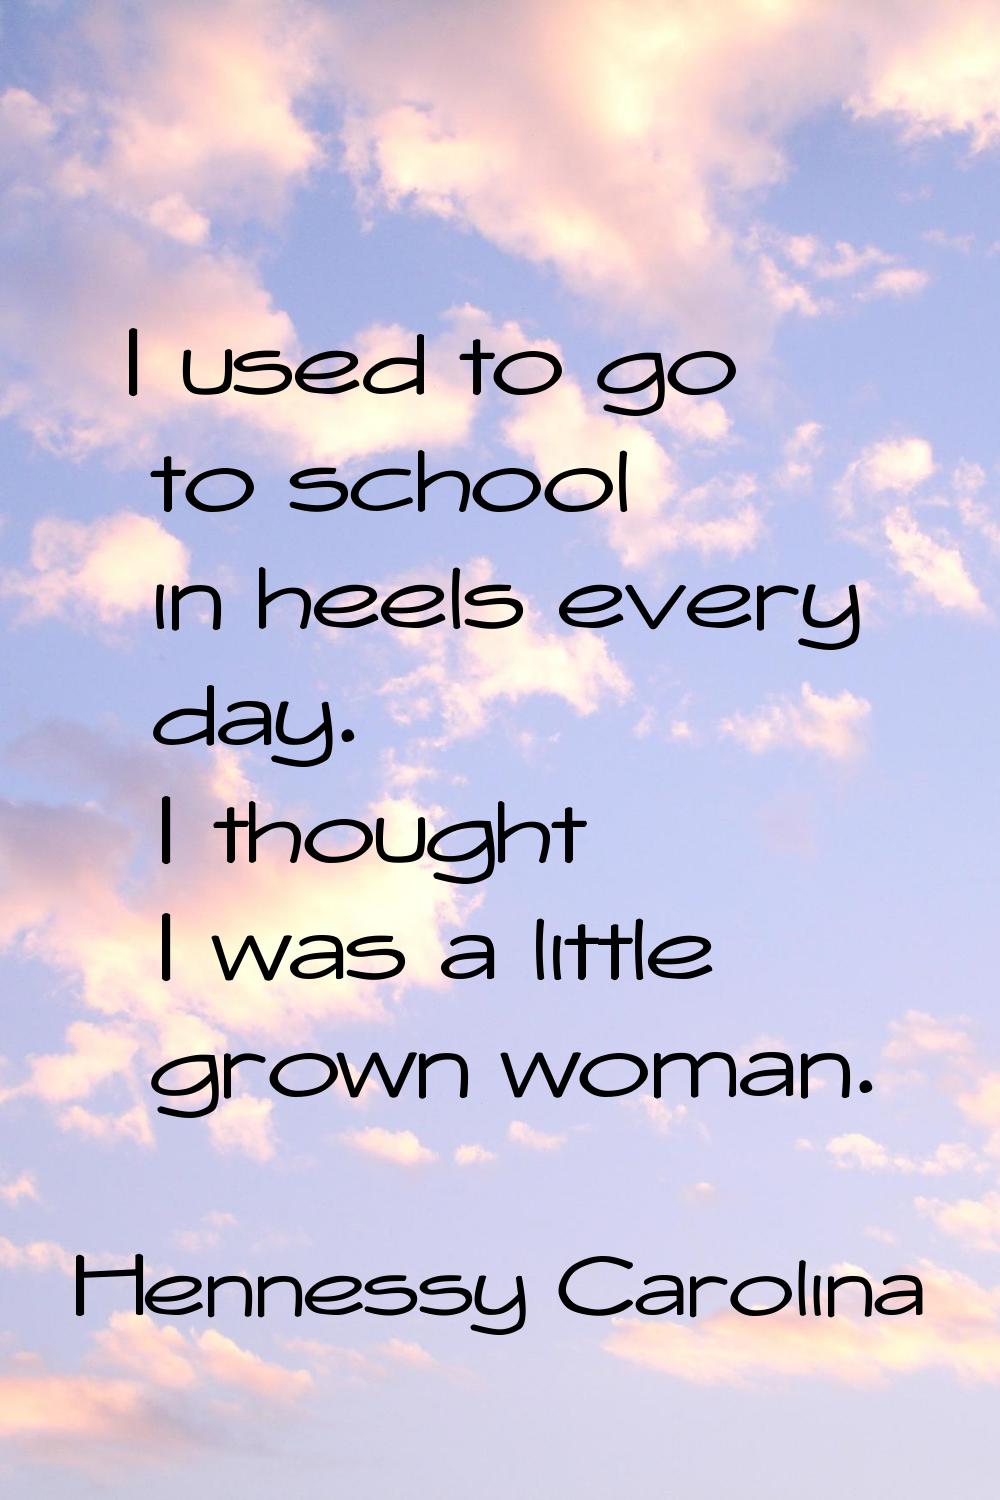 I used to go to school in heels every day. I thought I was a little grown woman.